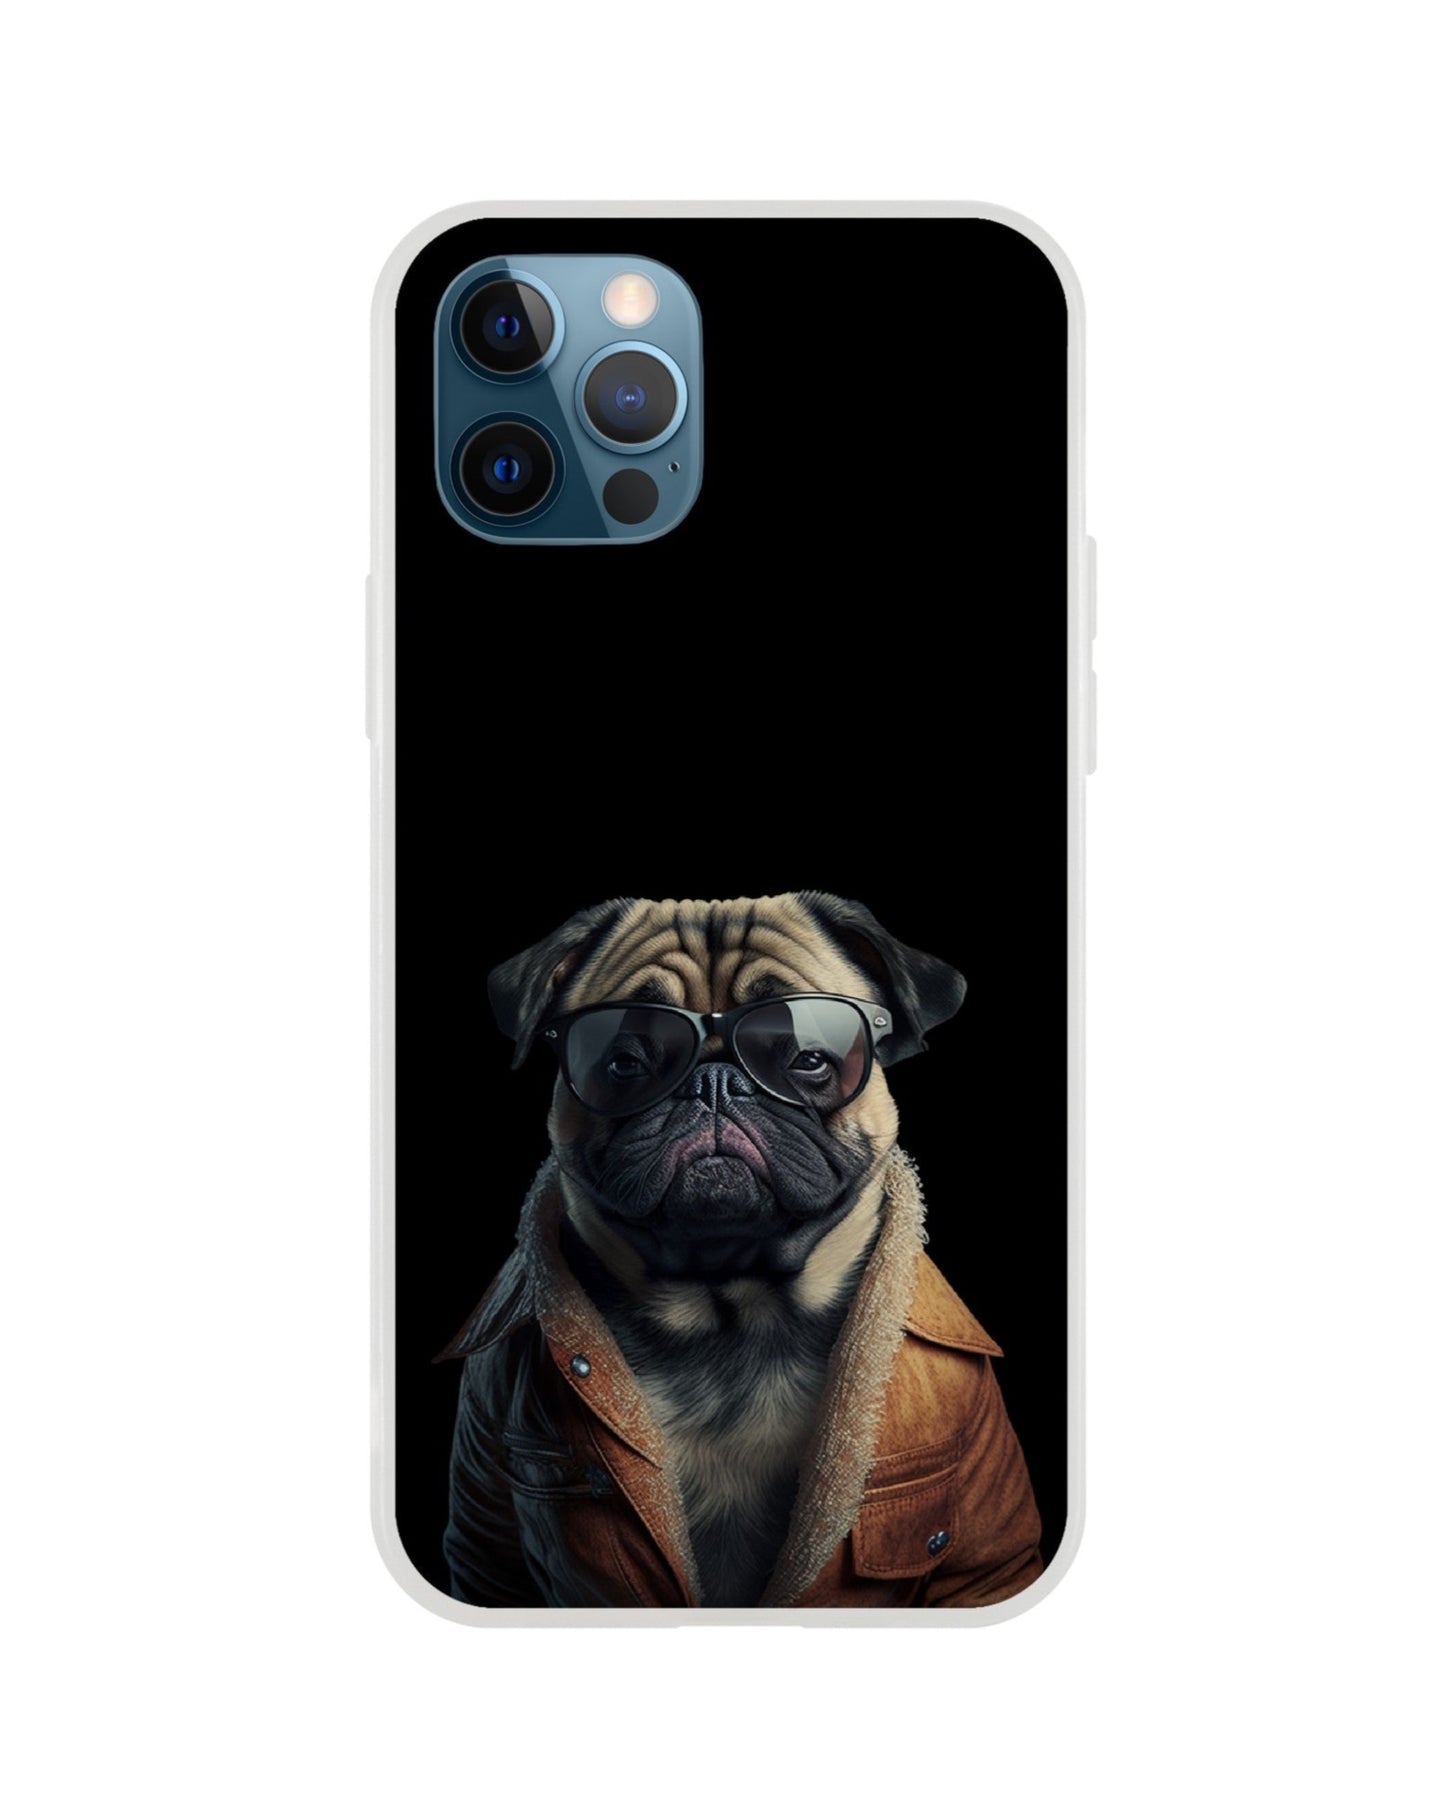 Cool pug mobile phone case